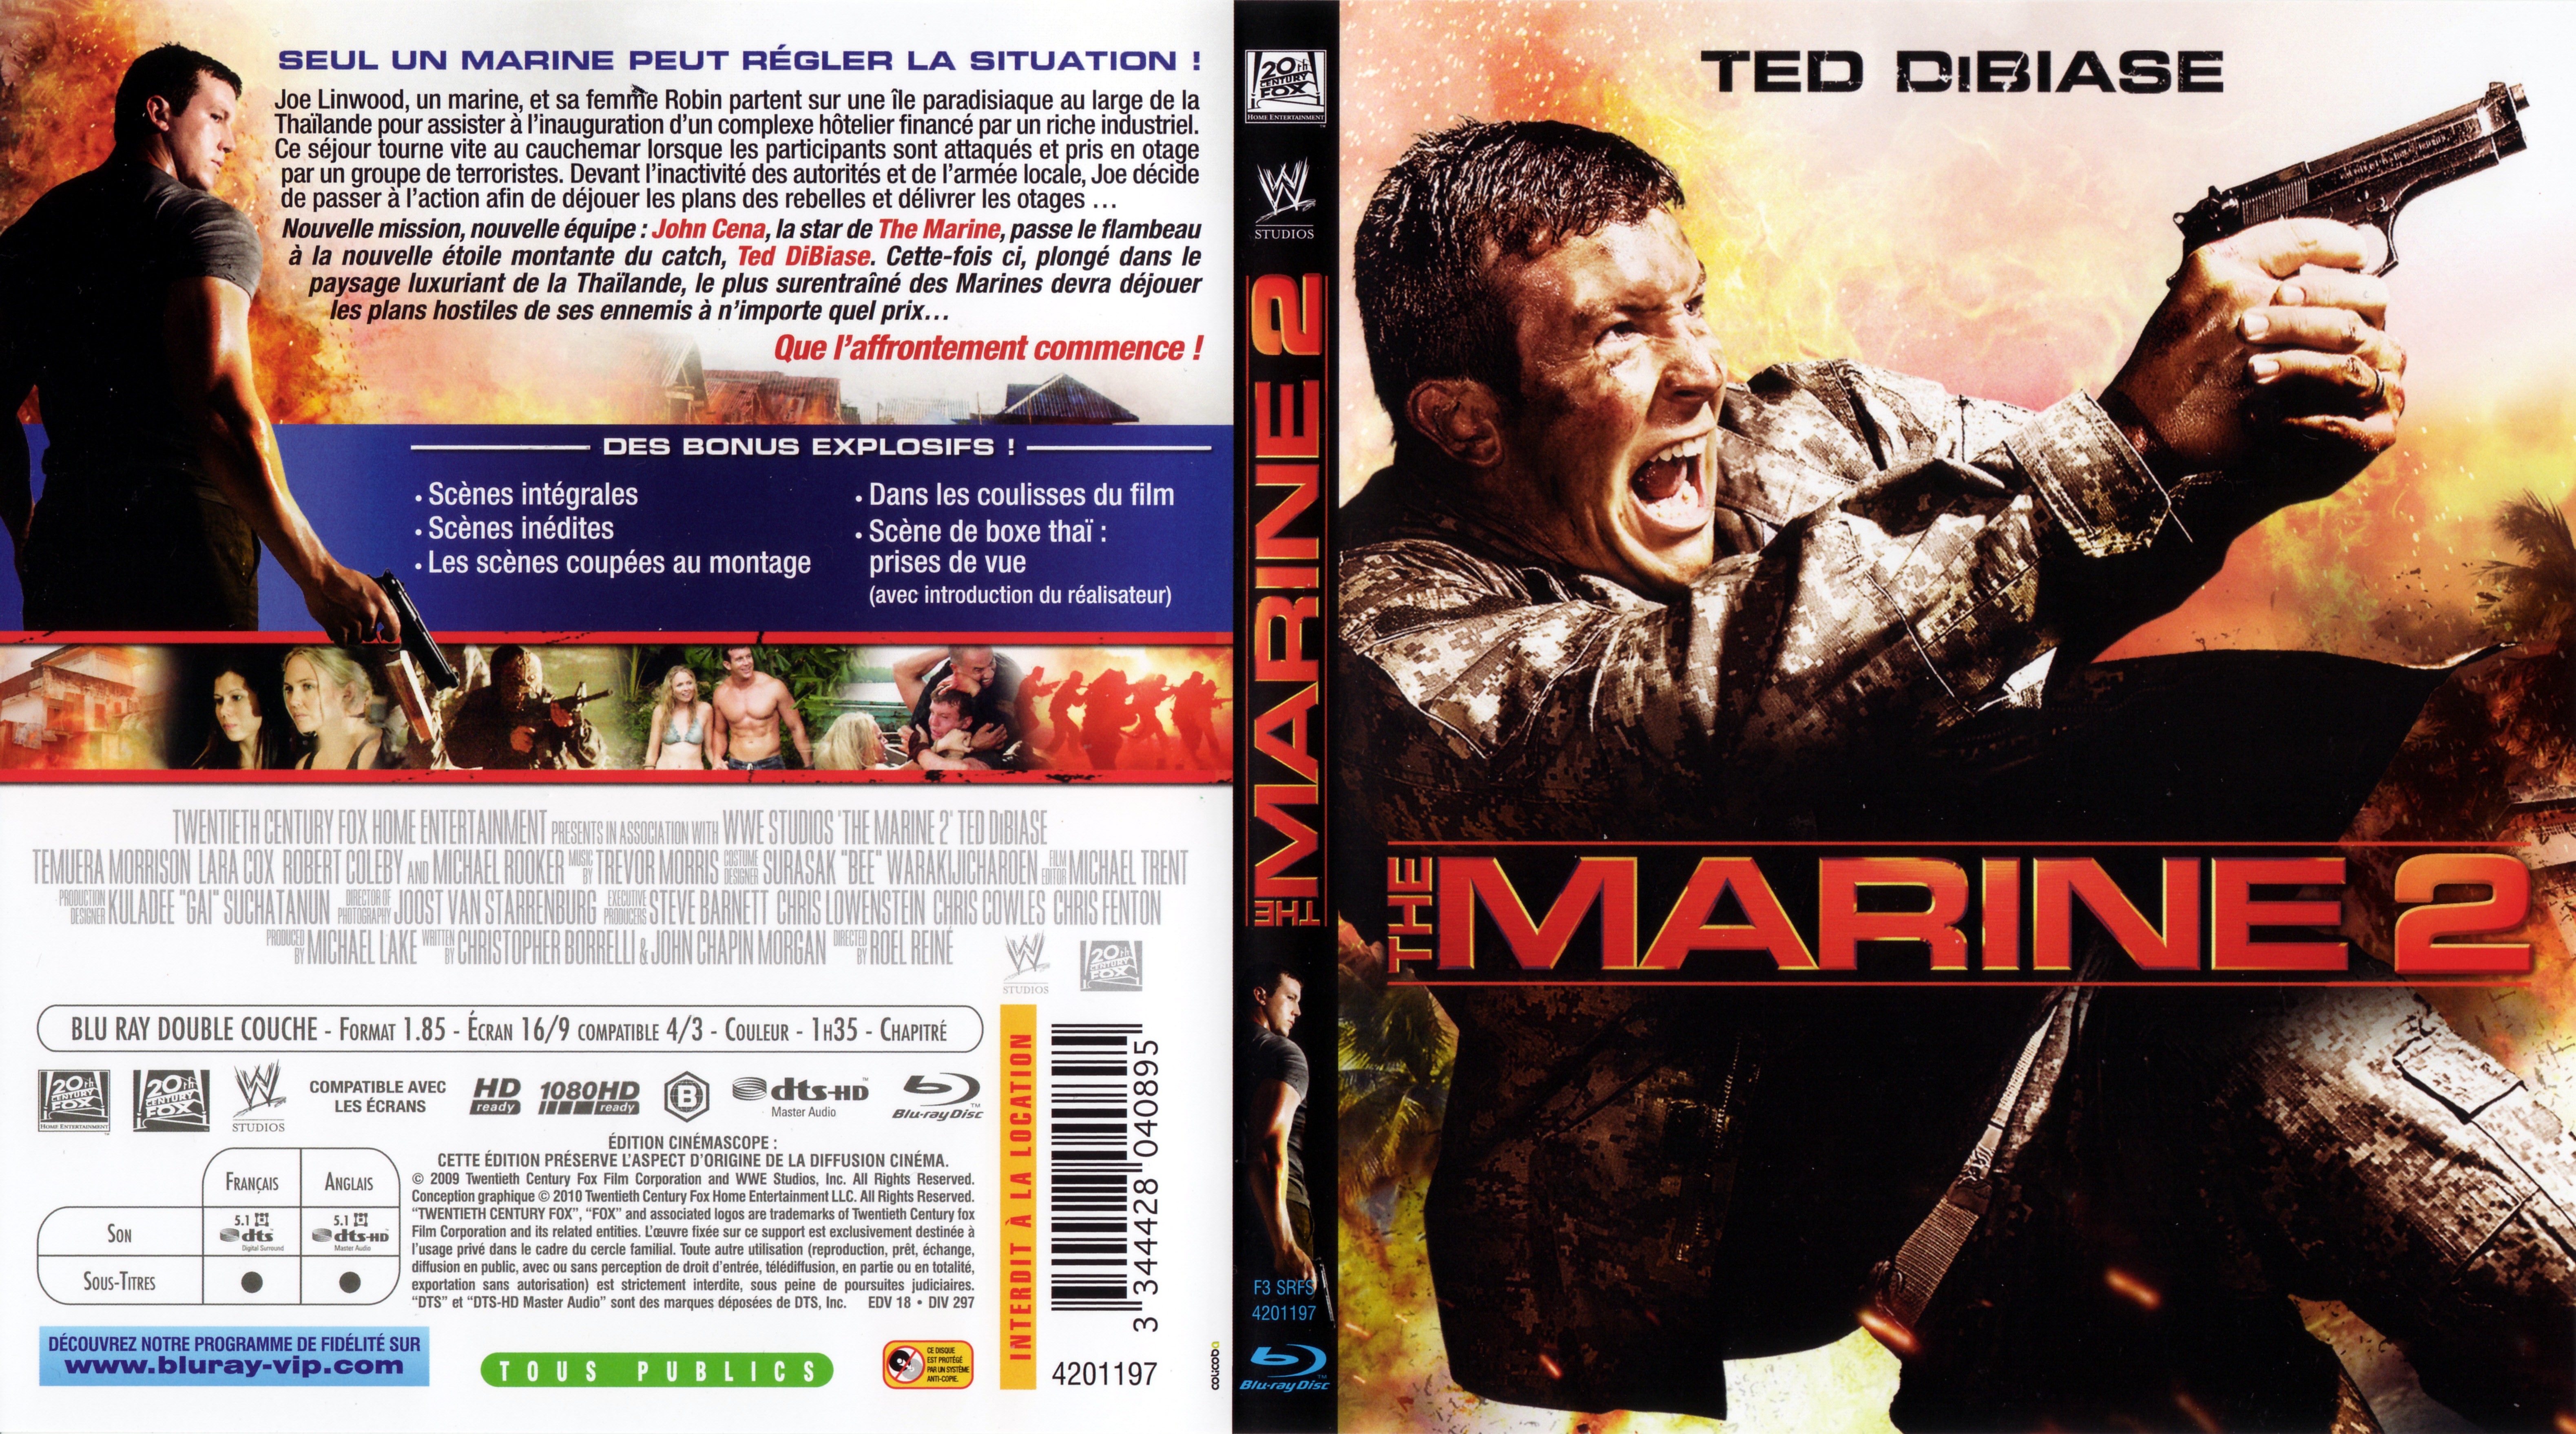 Jaquette DVD The Marine 2 (BLU-RAY)